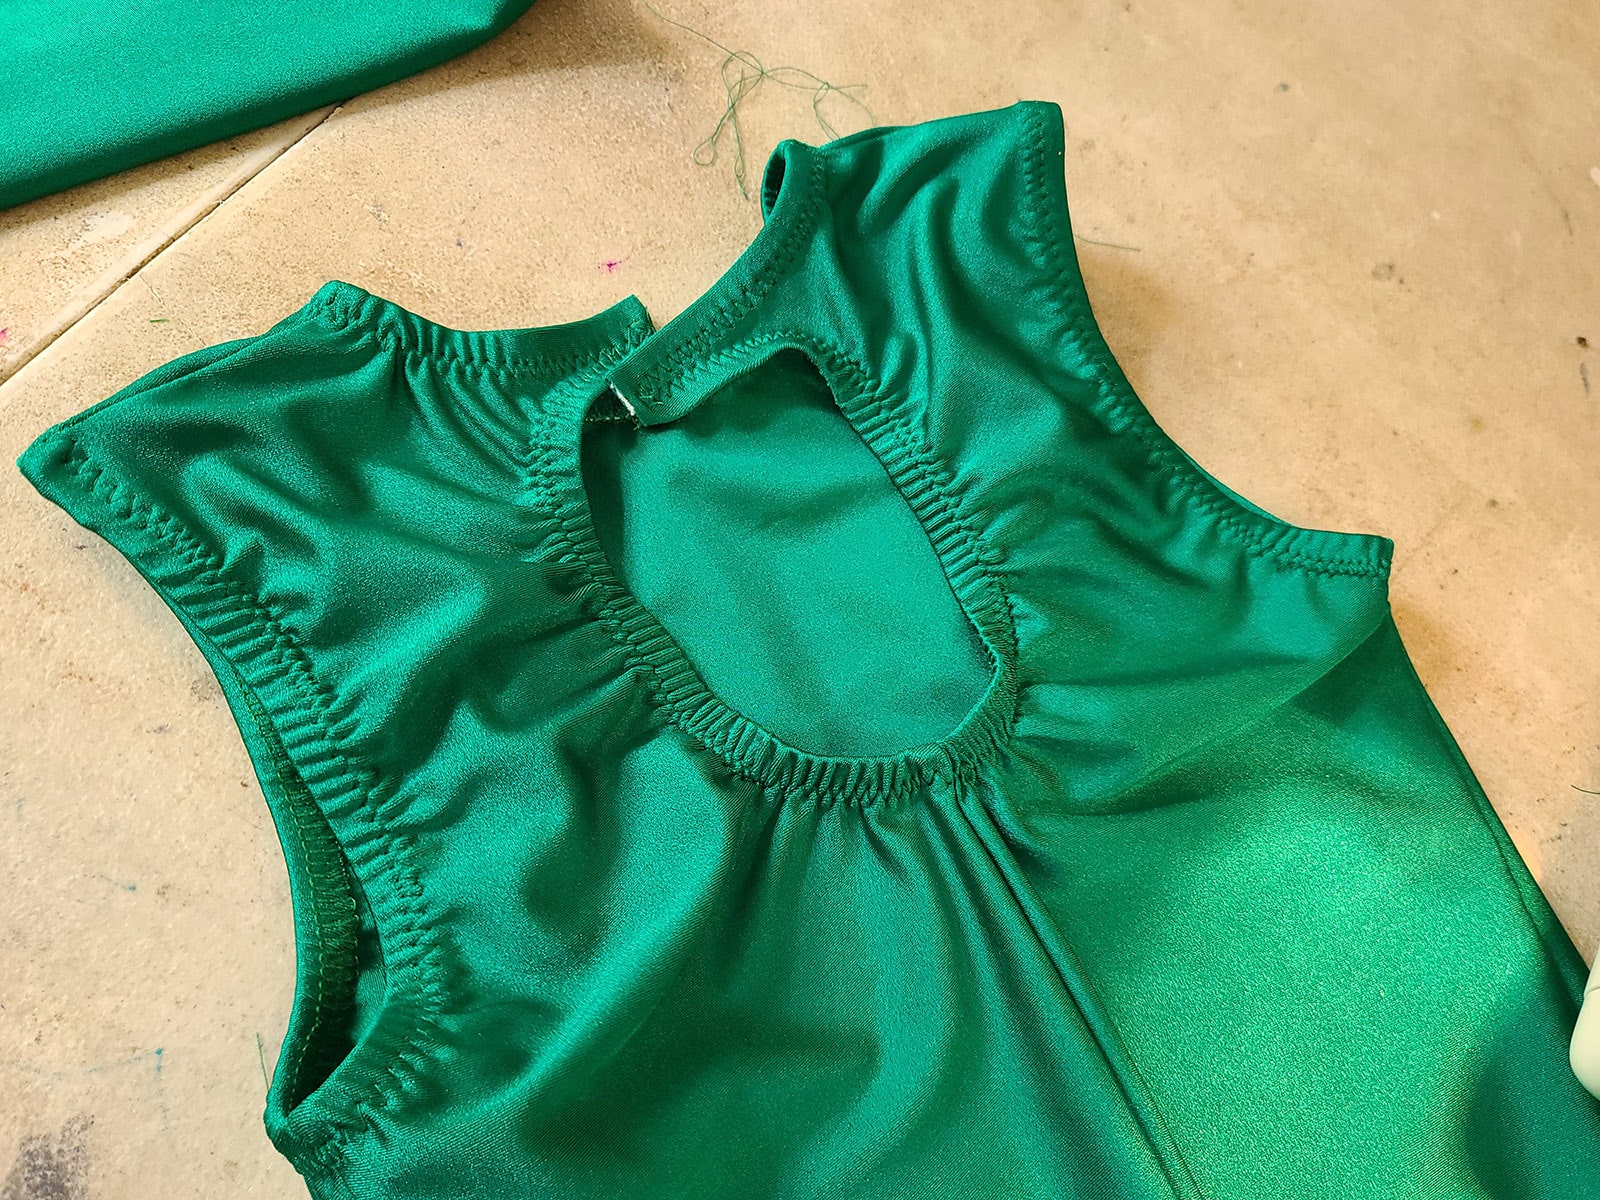 The bodice of a green skating dress with elastic sewn into the arm holes and neckline.